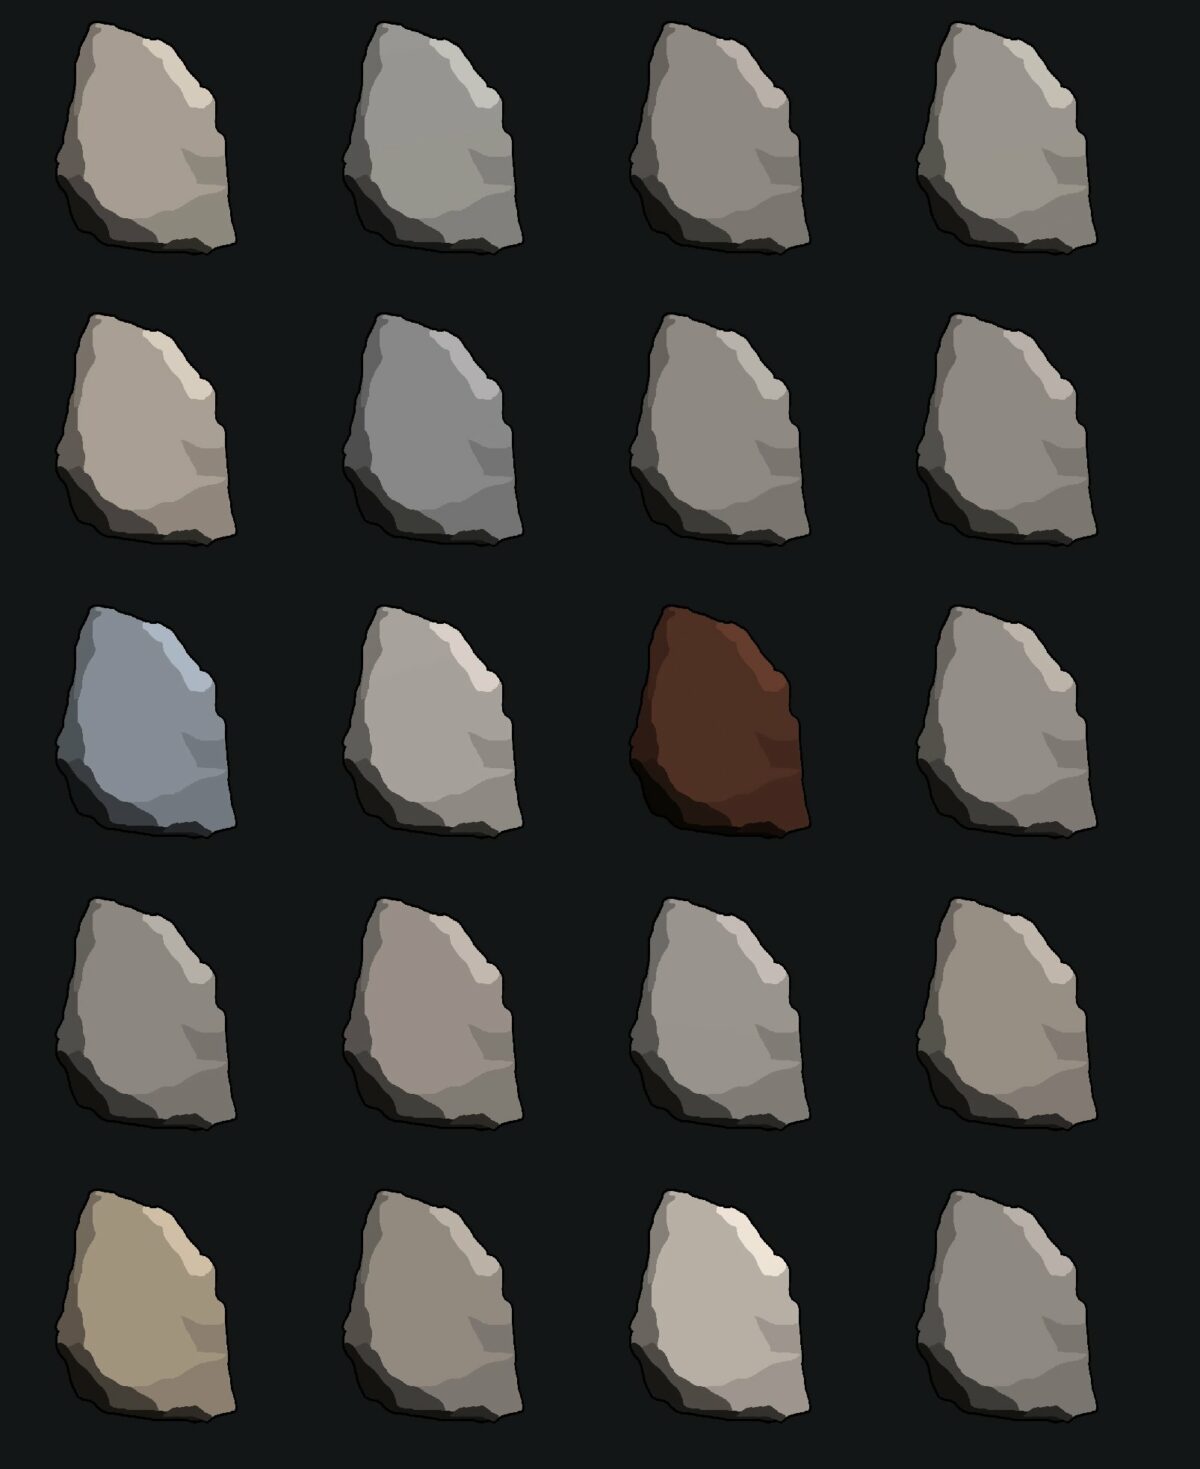 Rocks in different shades of grey and brown - Bitcoin Inscriptions